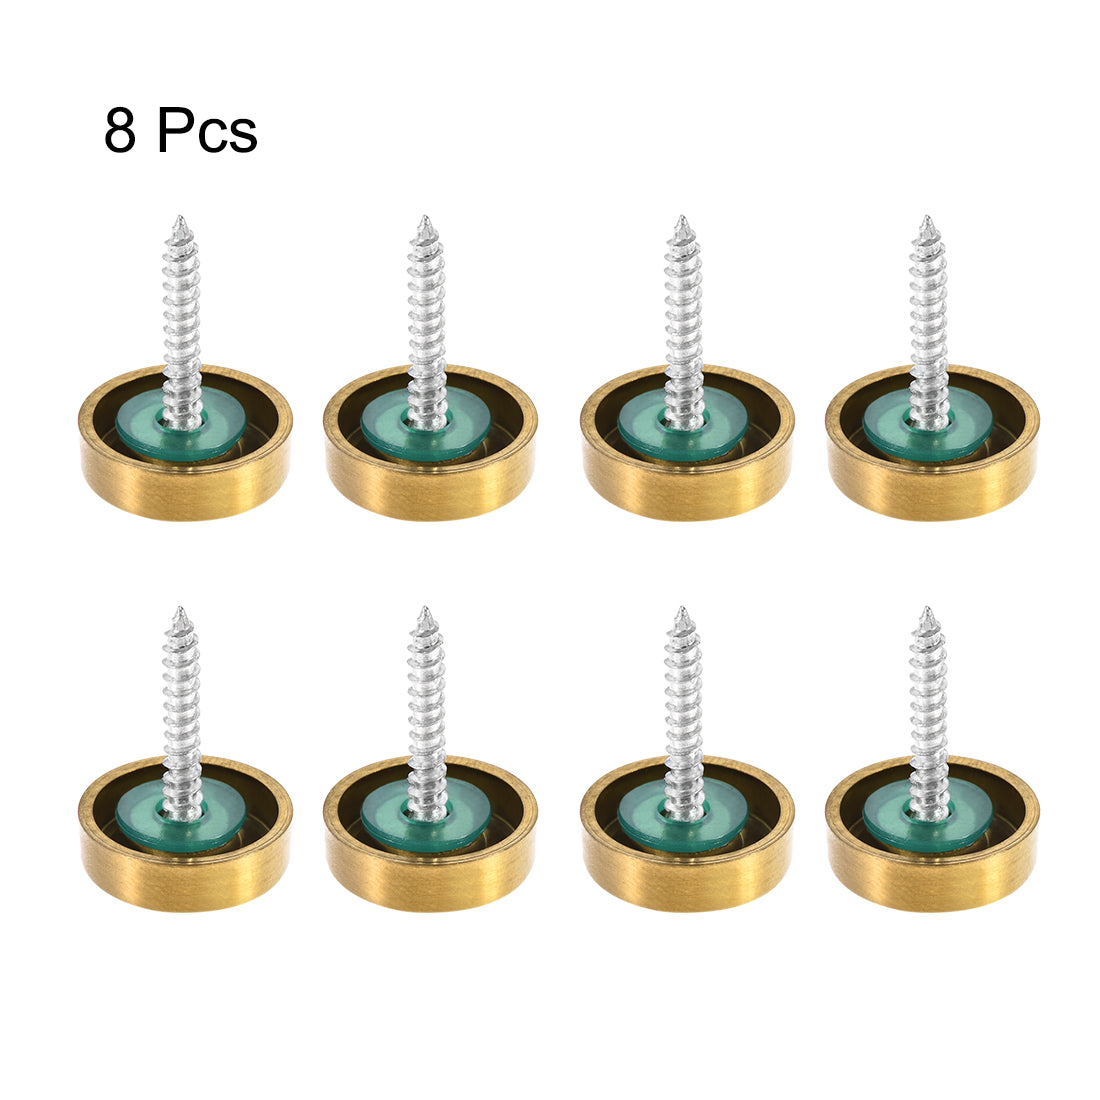 Uxcell Uxcell Mirror Screws, Decorative Cap Fasteners Cover Nails, Electroplated, Bright Golden 22mm/0.87" 8pcs